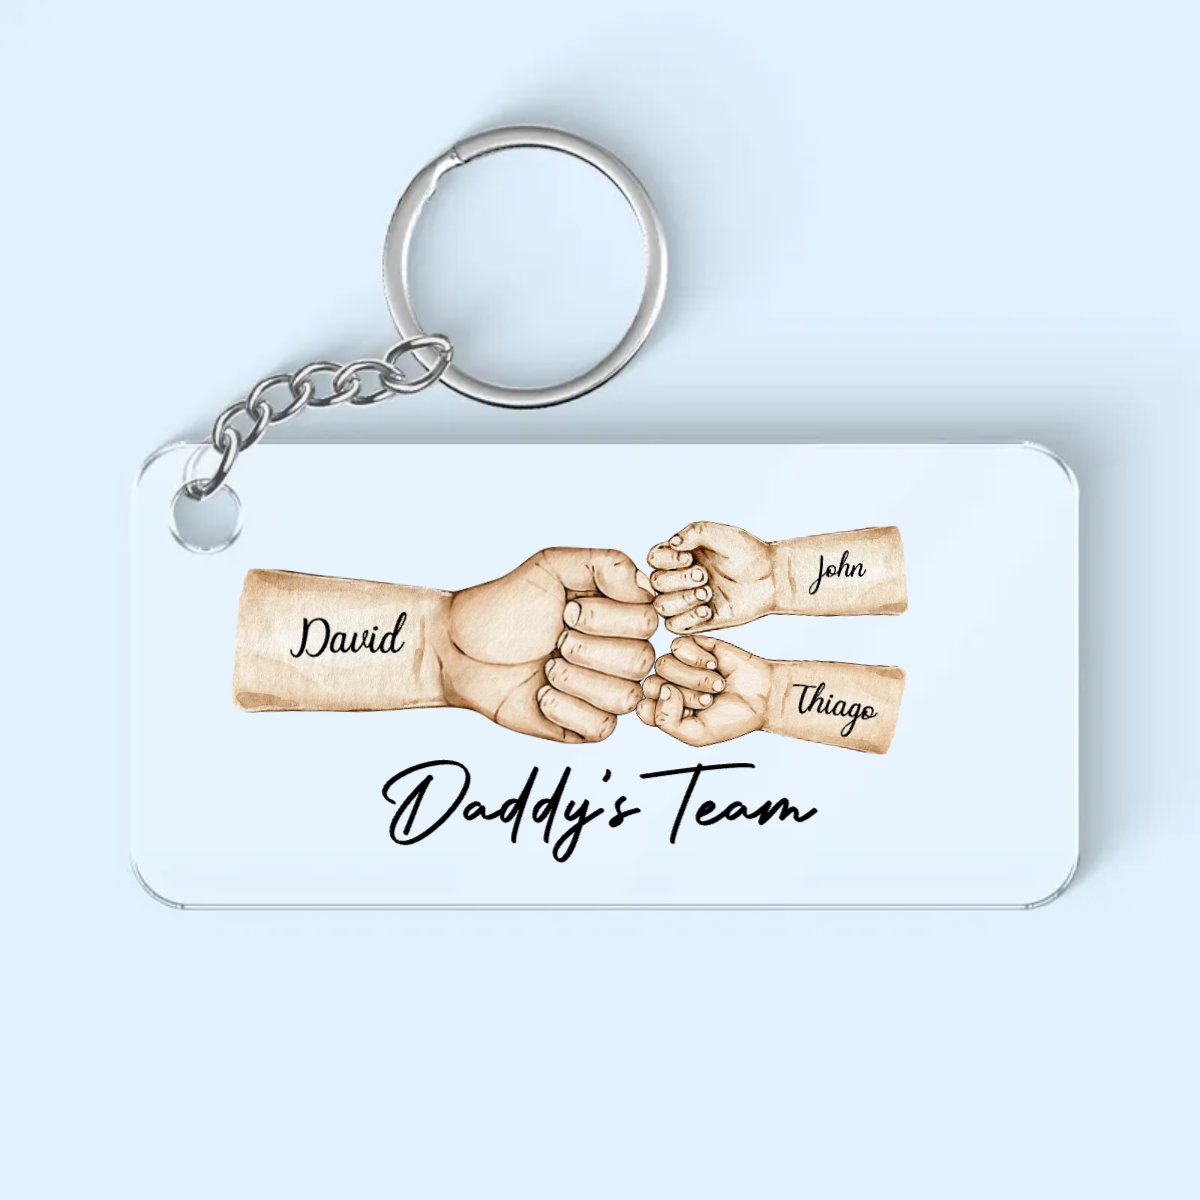 Father's Day - Daddy's Team Fist Bump - Personalized Acrylic Keychain - The Next Custom Gift